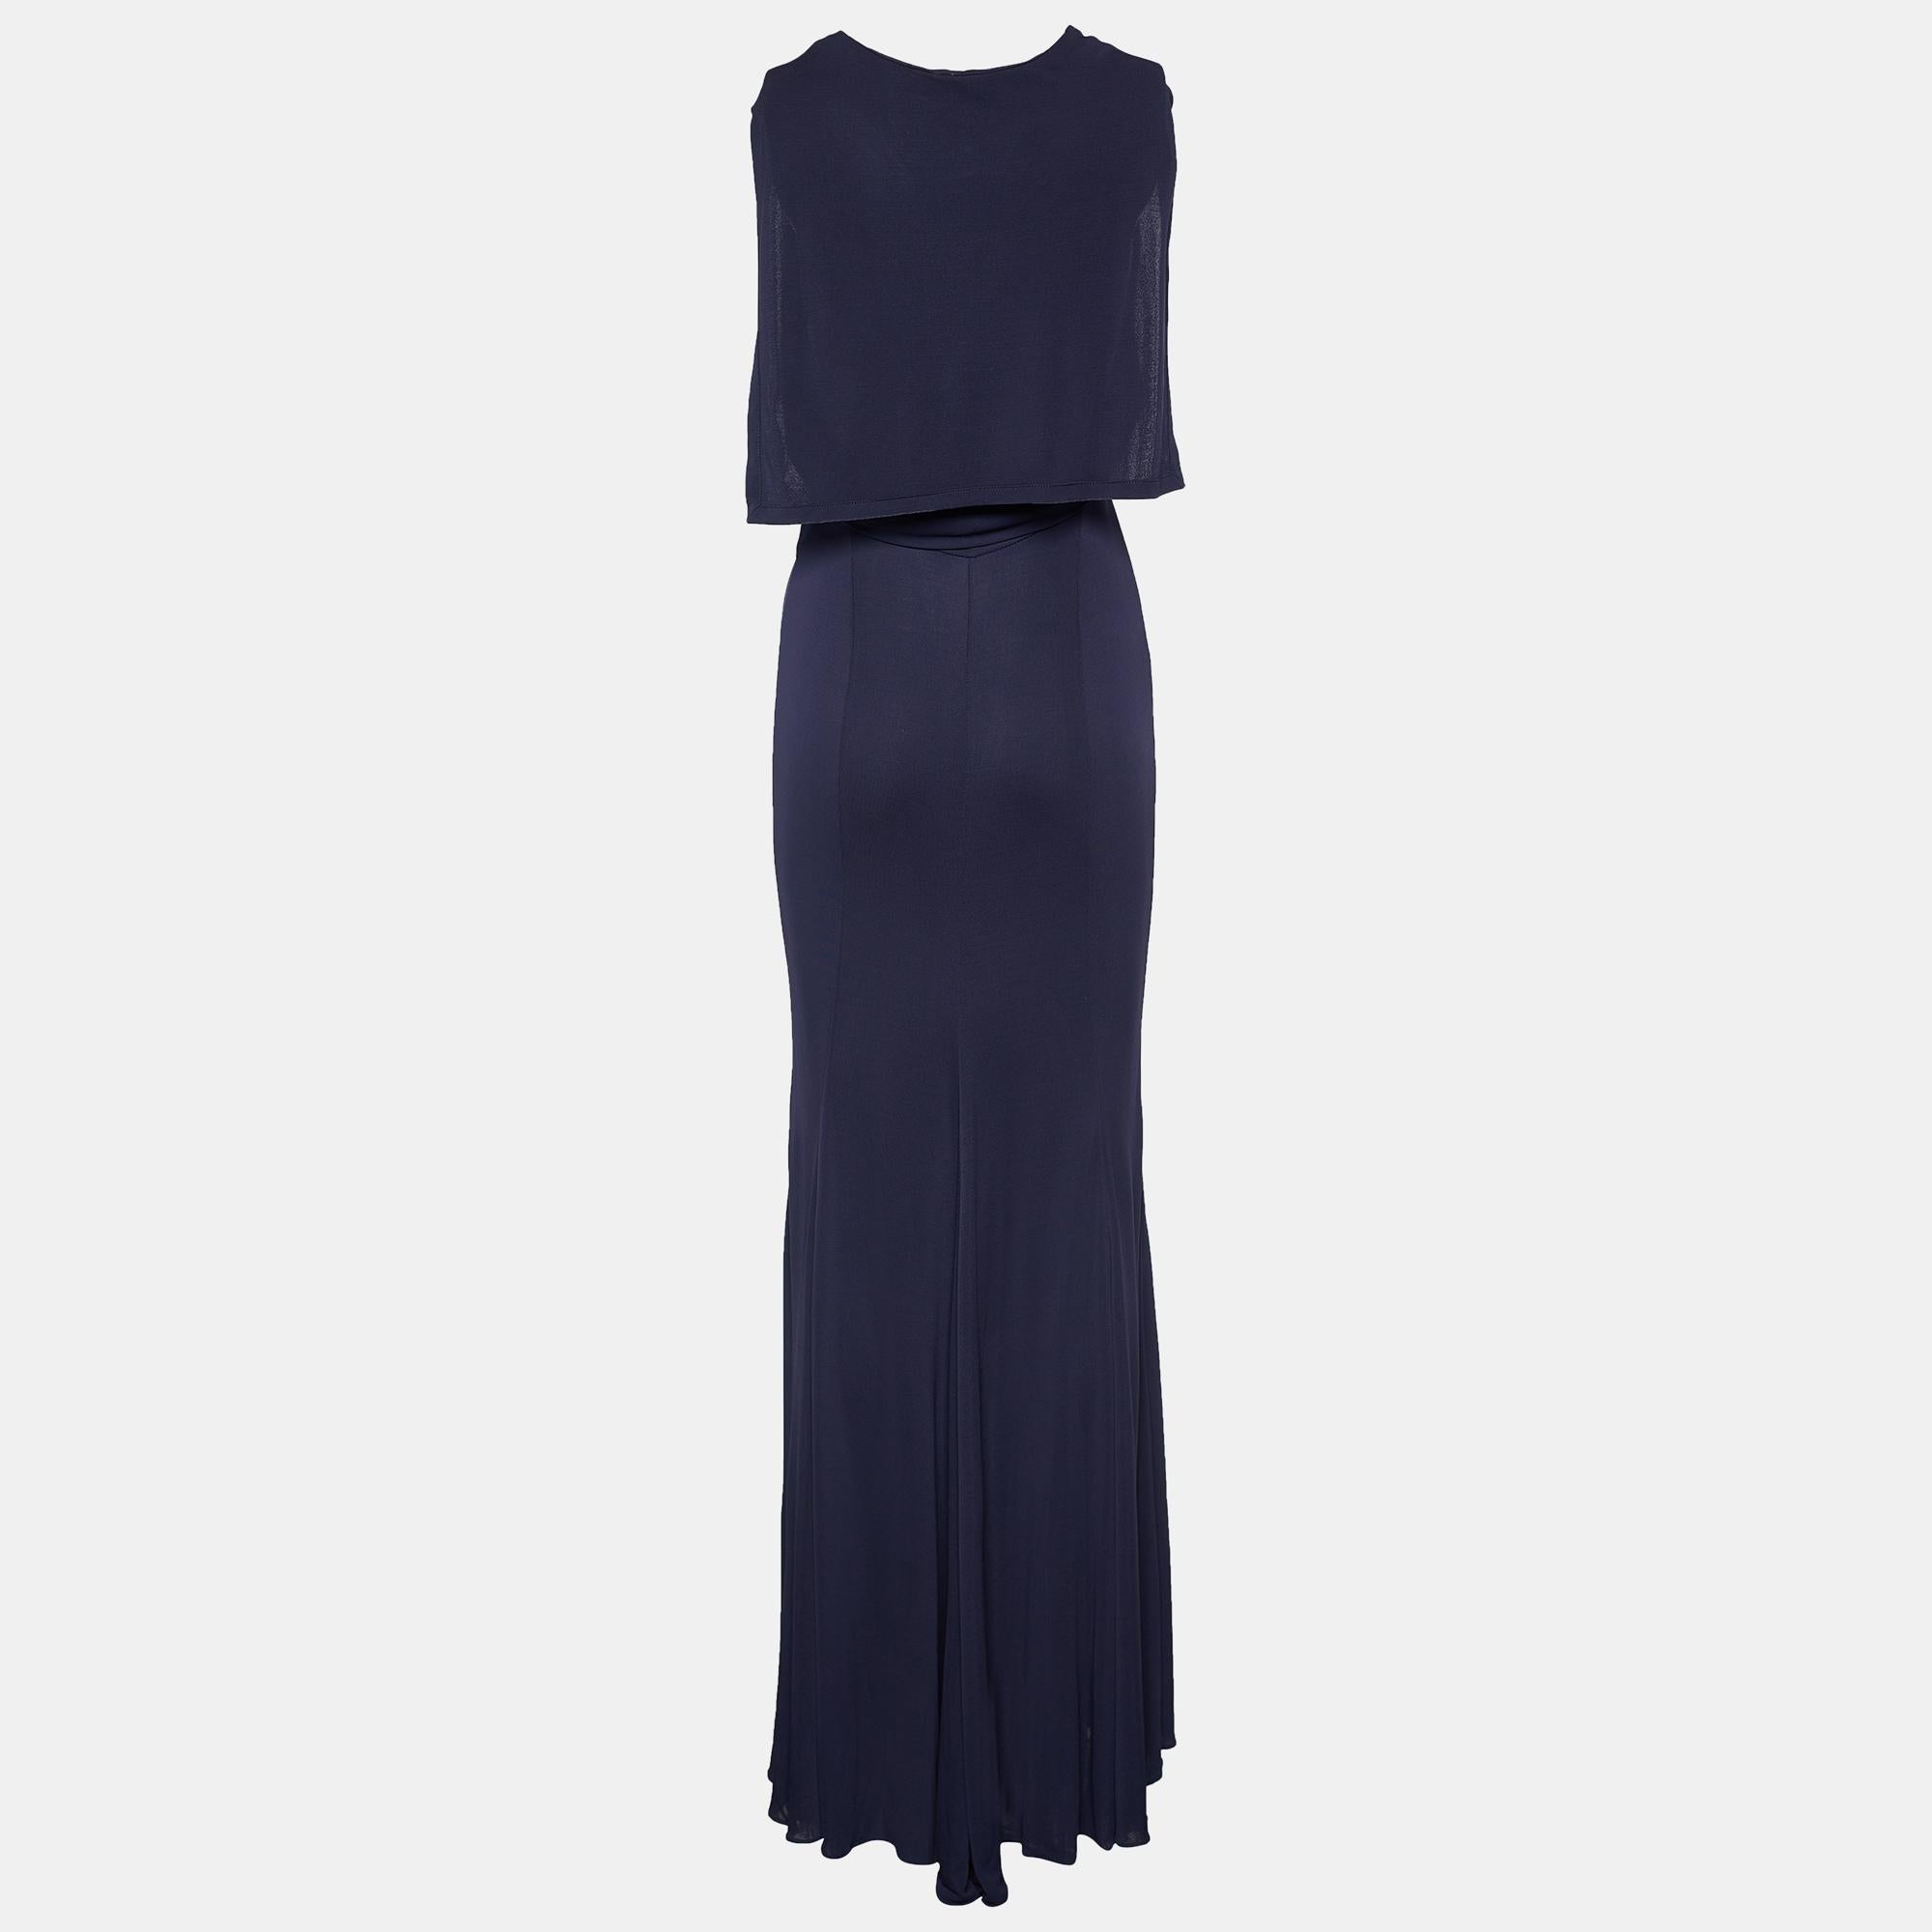 Intricately tailored into a leaner, graceful silhouette, this maxi dress from the house of Hermès will add a luxurious edge to your look. It has been finely stitched using purple knit fabric with a striking neckline. Embrace a simplistic yet elegant